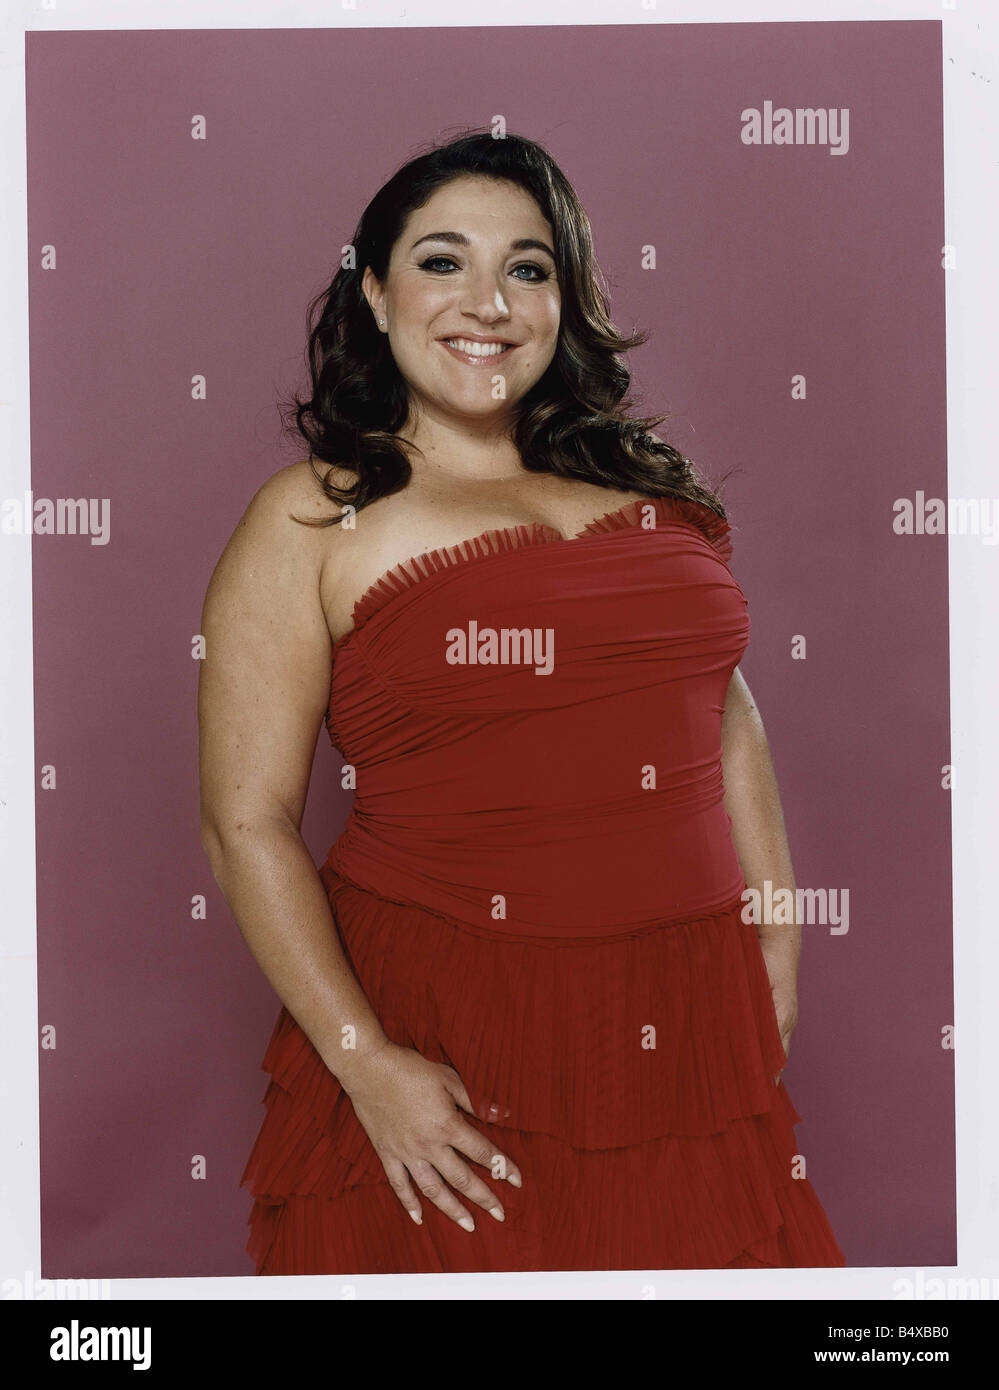 Television preseneter and child psychologoist Jo Frost more commonly known as Supernanny poses during a photoshoot July 2006 Stock Photo